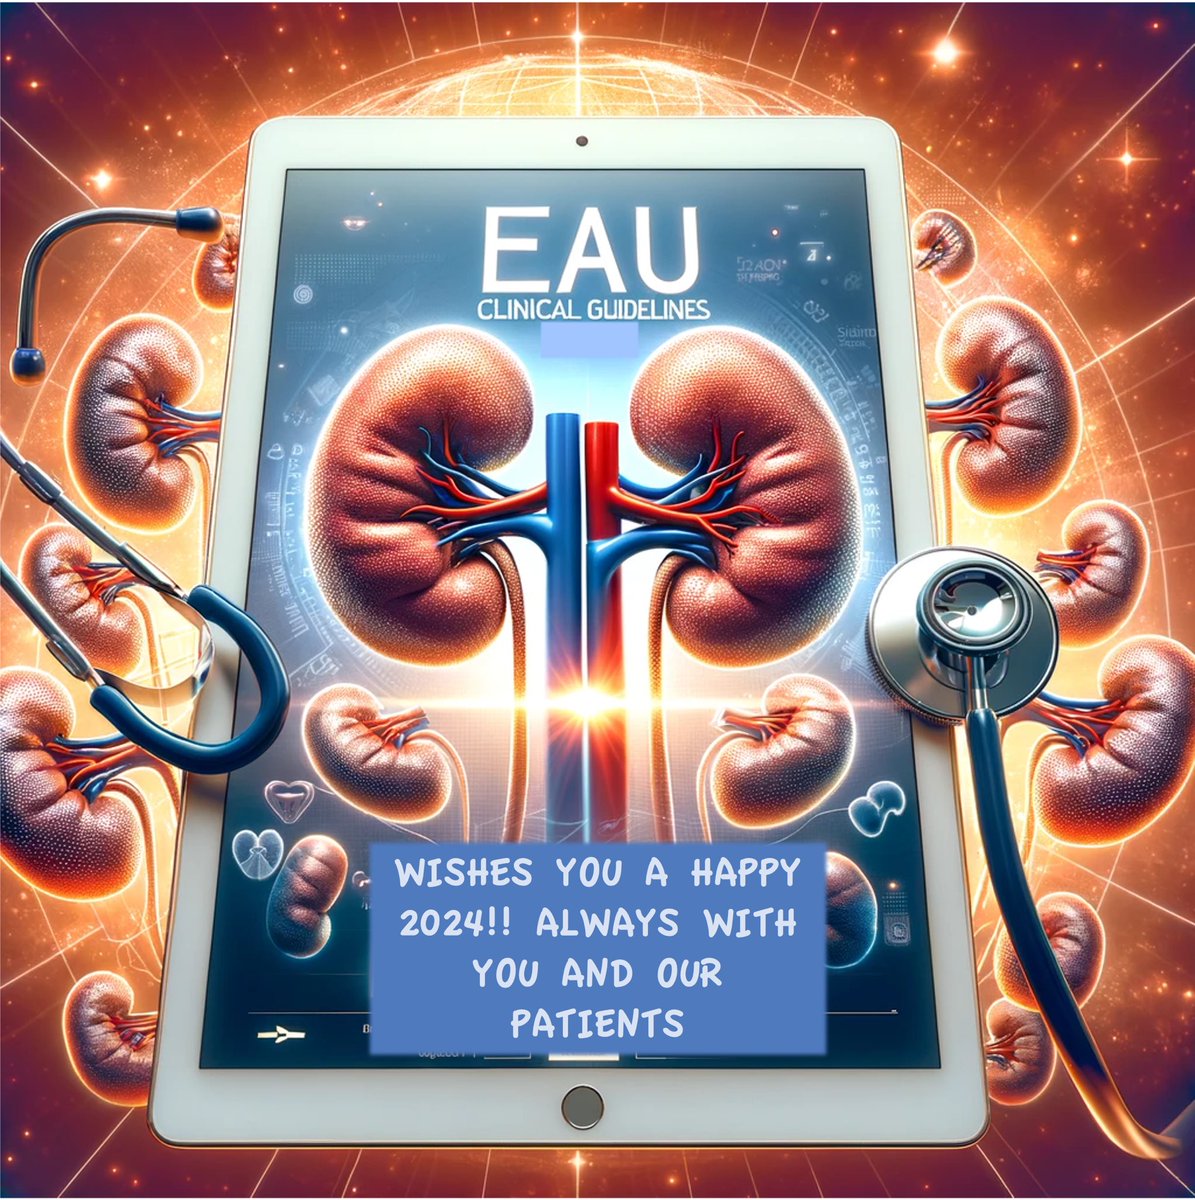 Best wishes my #urosome friends for 2024! From the #eauguidelines after a year working hard we can tell you we feel grateful to all of you that believe in us. Special thanks to guidelines family: panel members, chairs, associates, committees, board, staff. For being marvellous!!